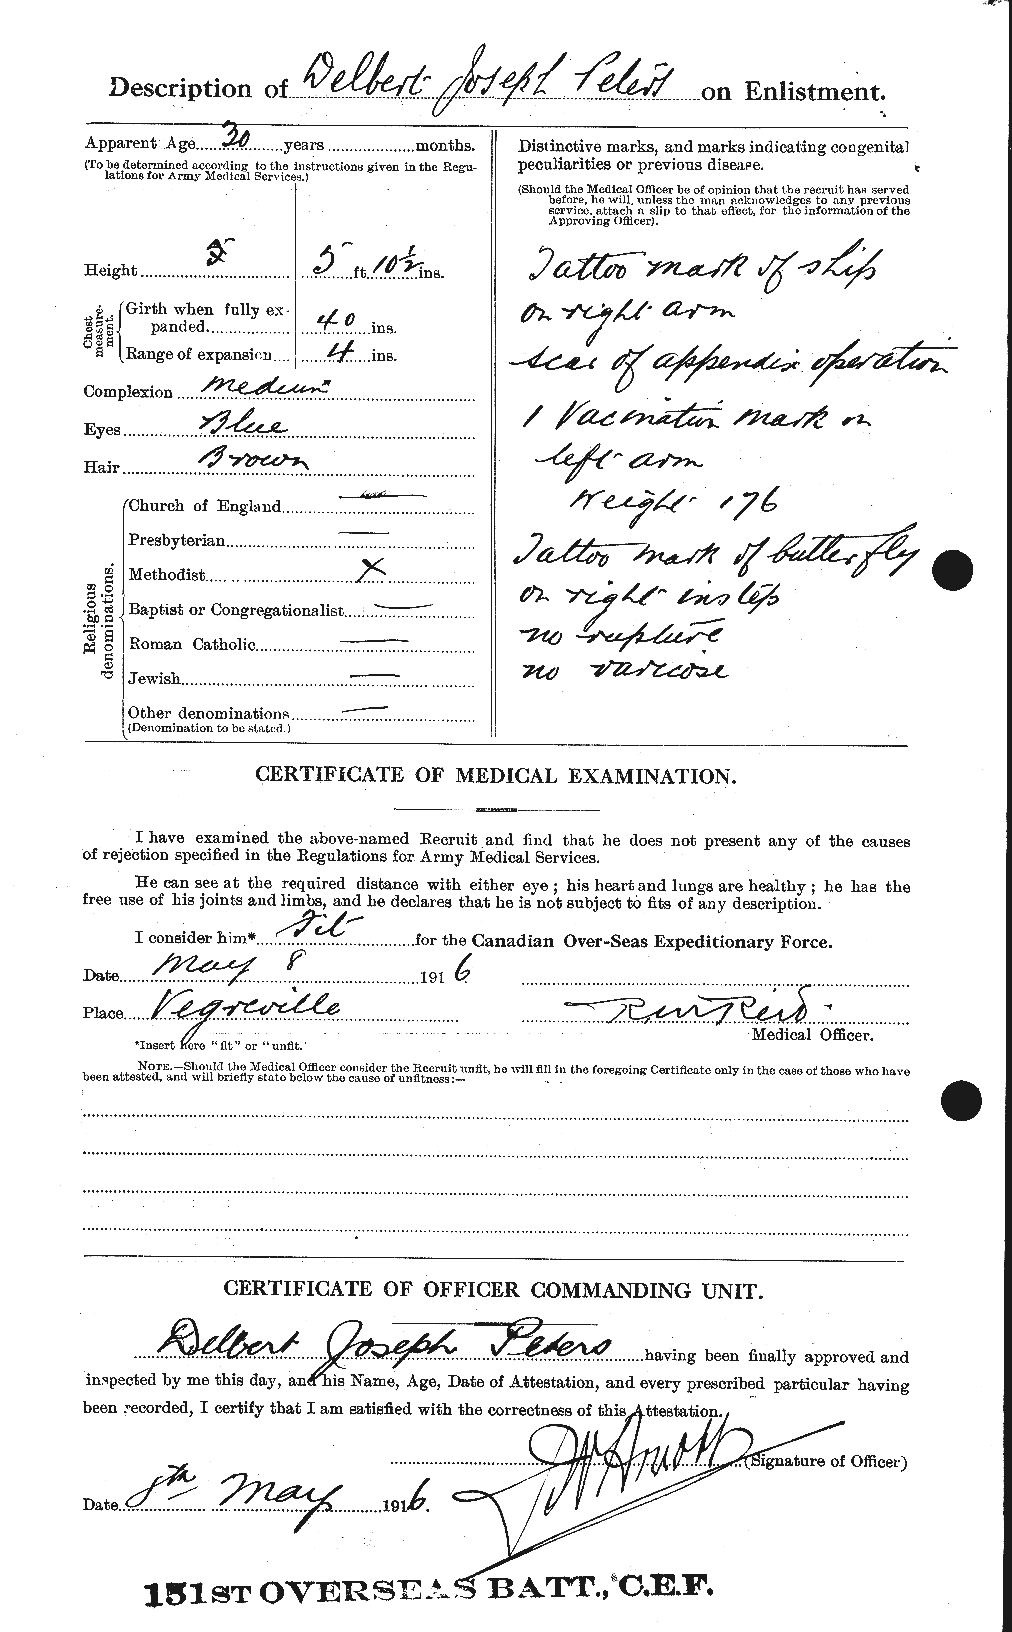 Personnel Records of the First World War - CEF 575391b